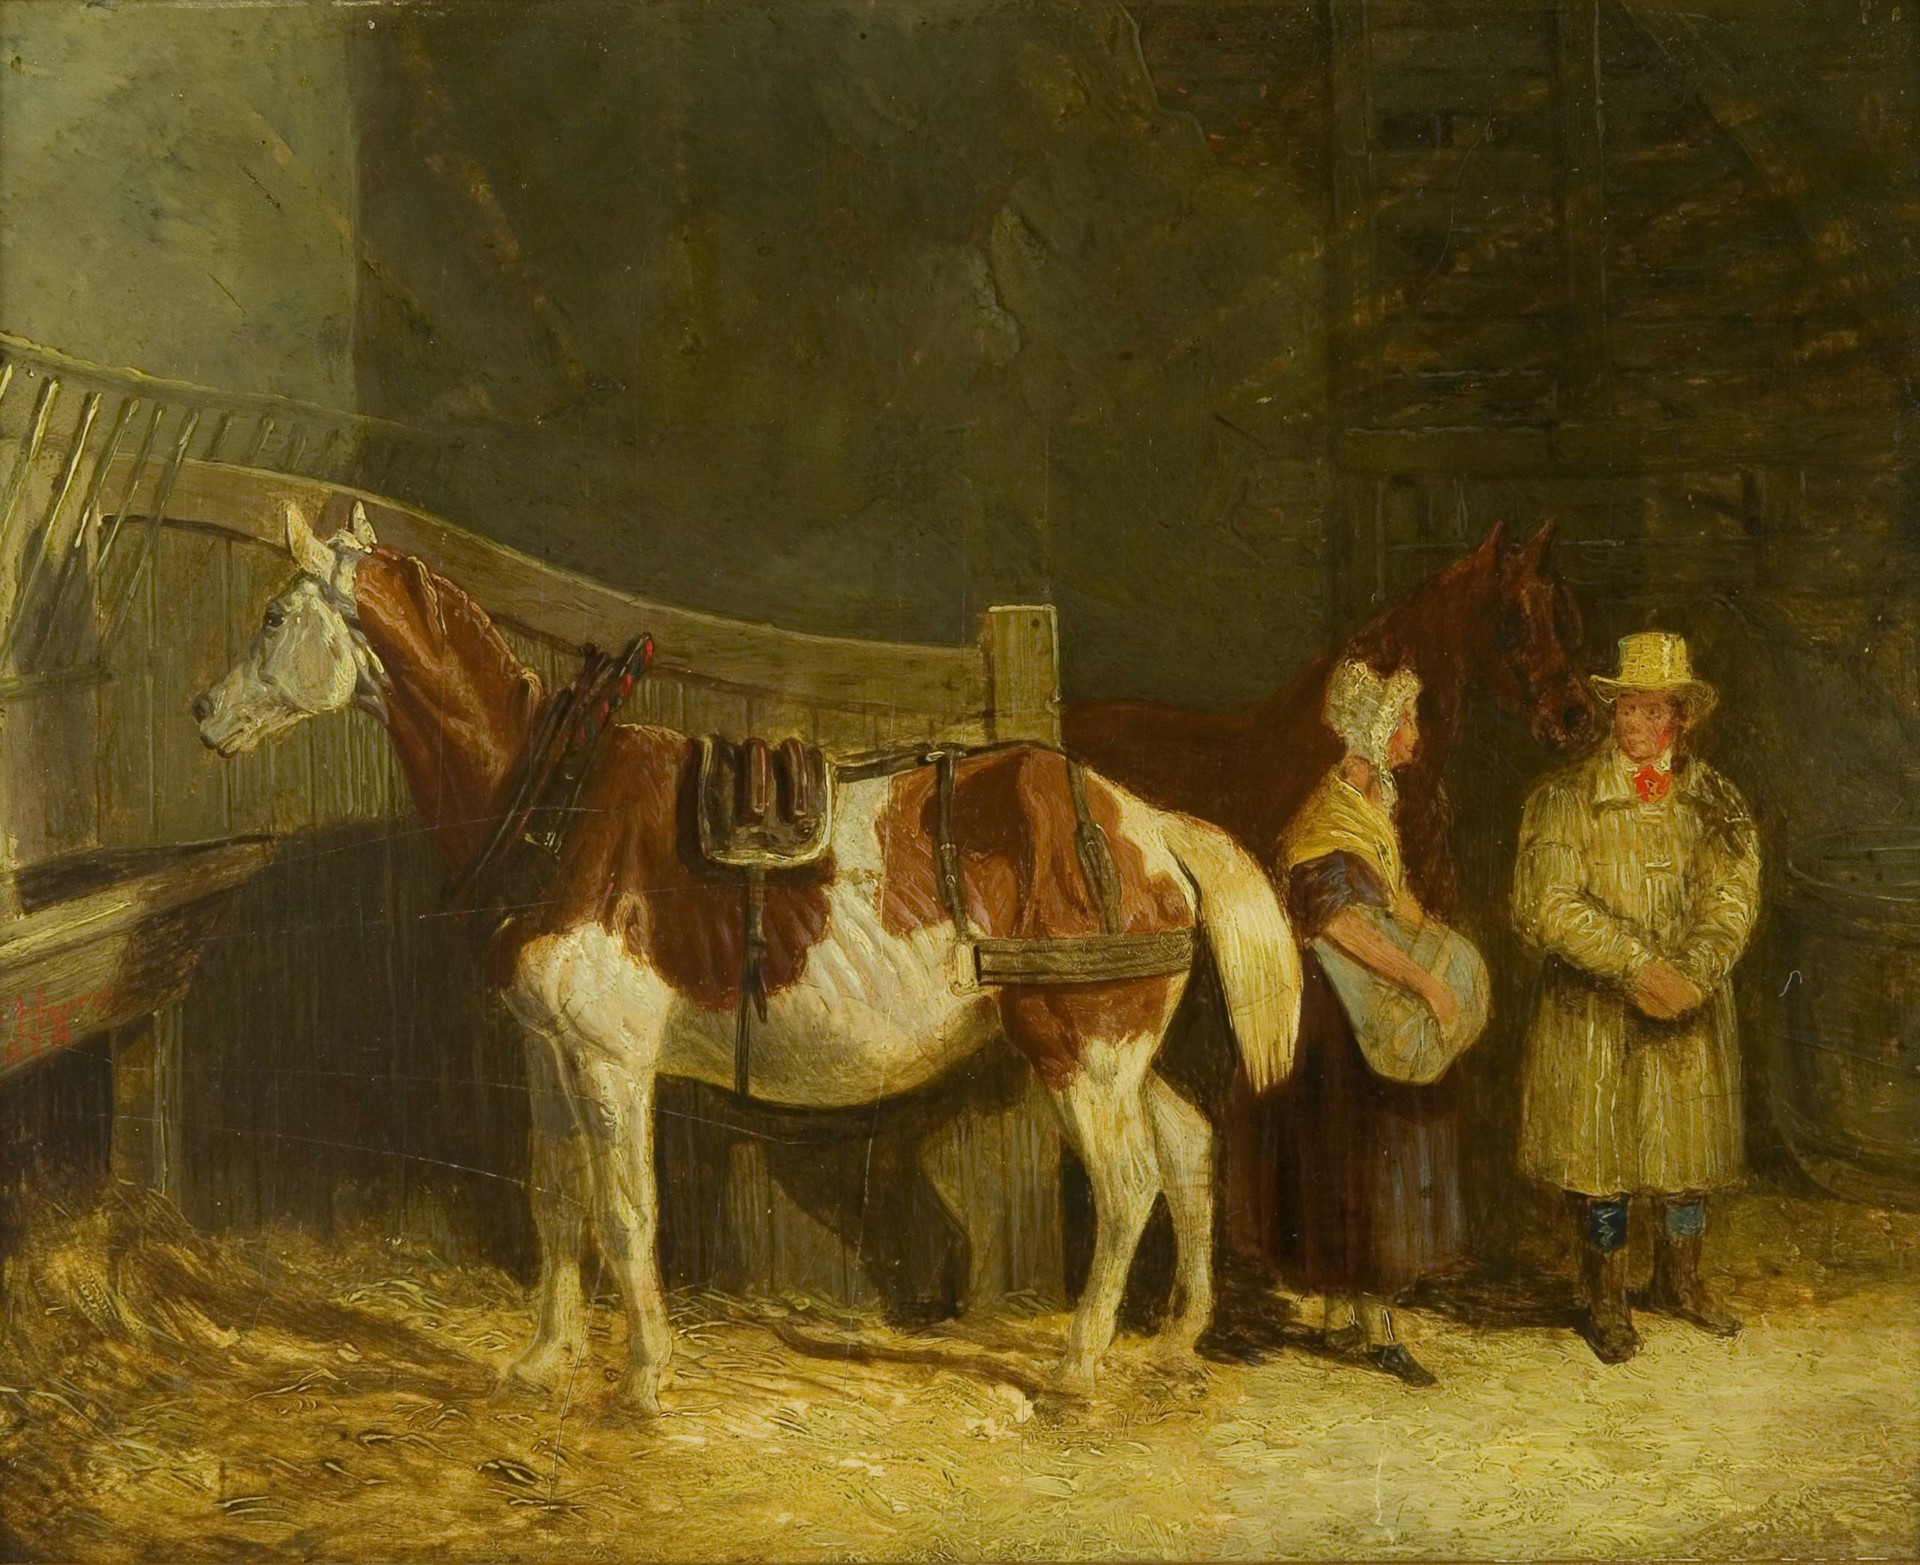 A Carriage Horse in a Stall with Attendants, 1828 by John Frederick Herring, Sr.